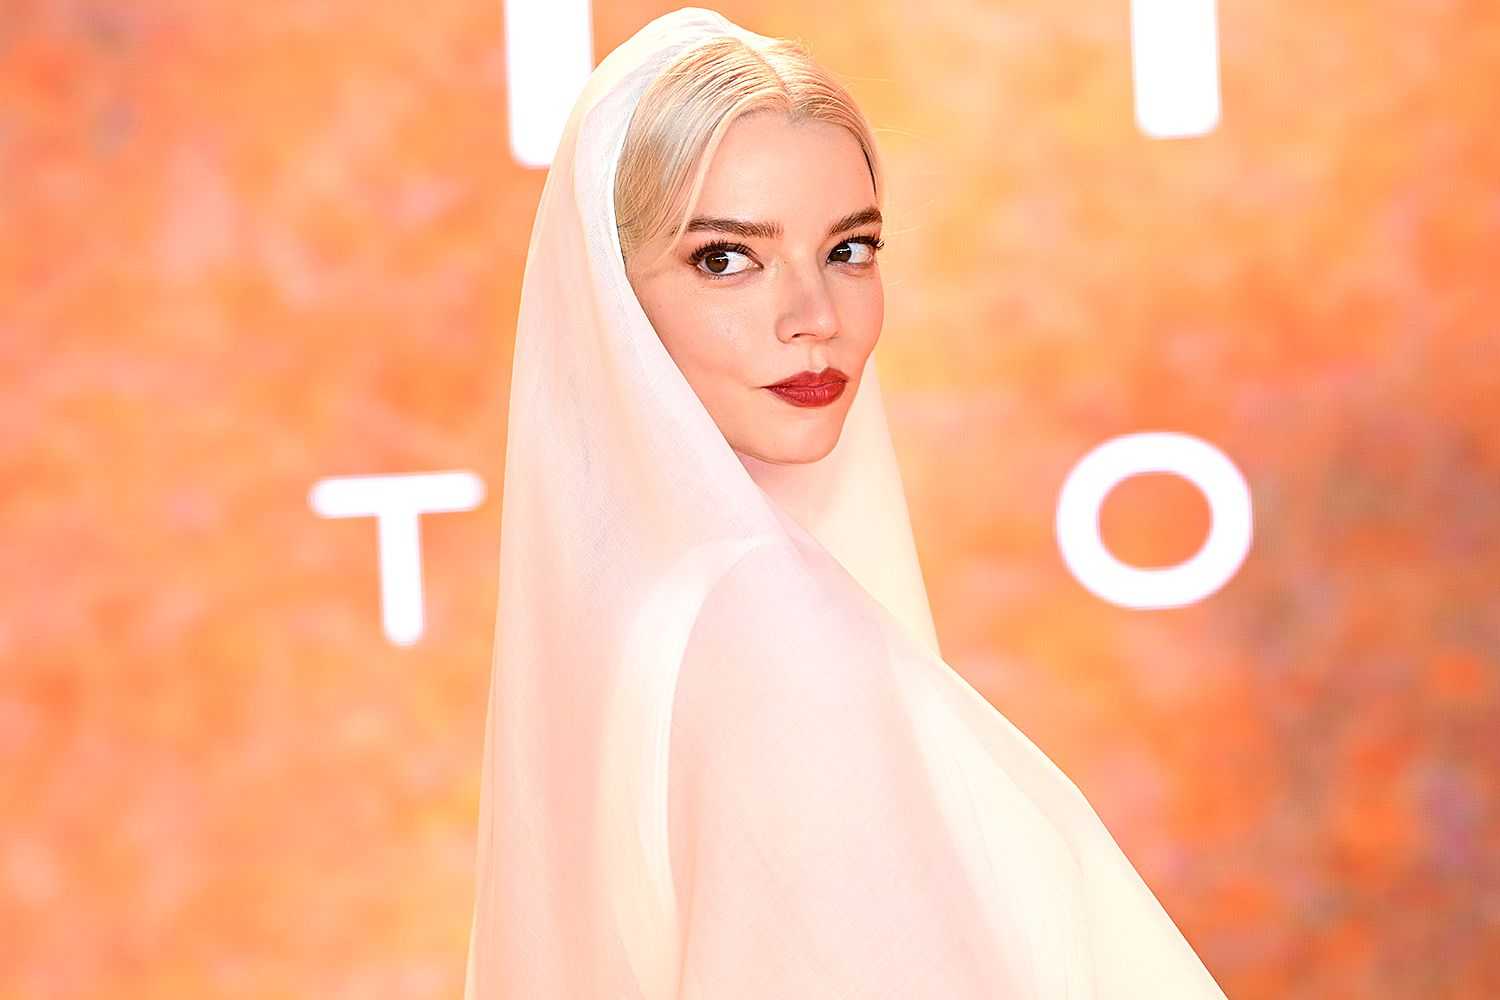 Anya Taylor-Joy delights fans with confirmation of role in Dune: Part Two at London premiere